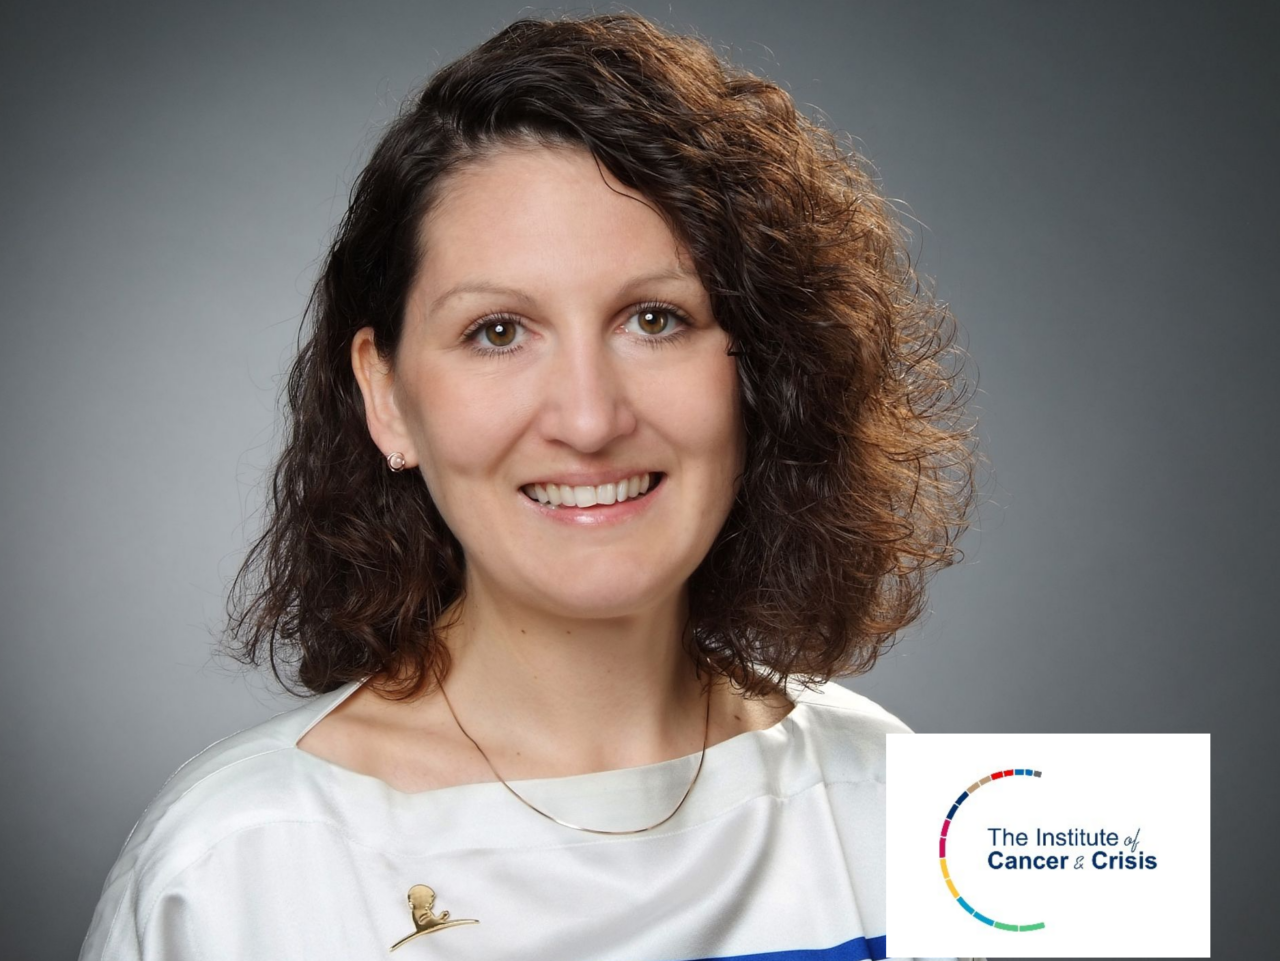 Dr. Alexandra Müller has joined the board of directors of The Institute of Cancer and Crisis – ICC